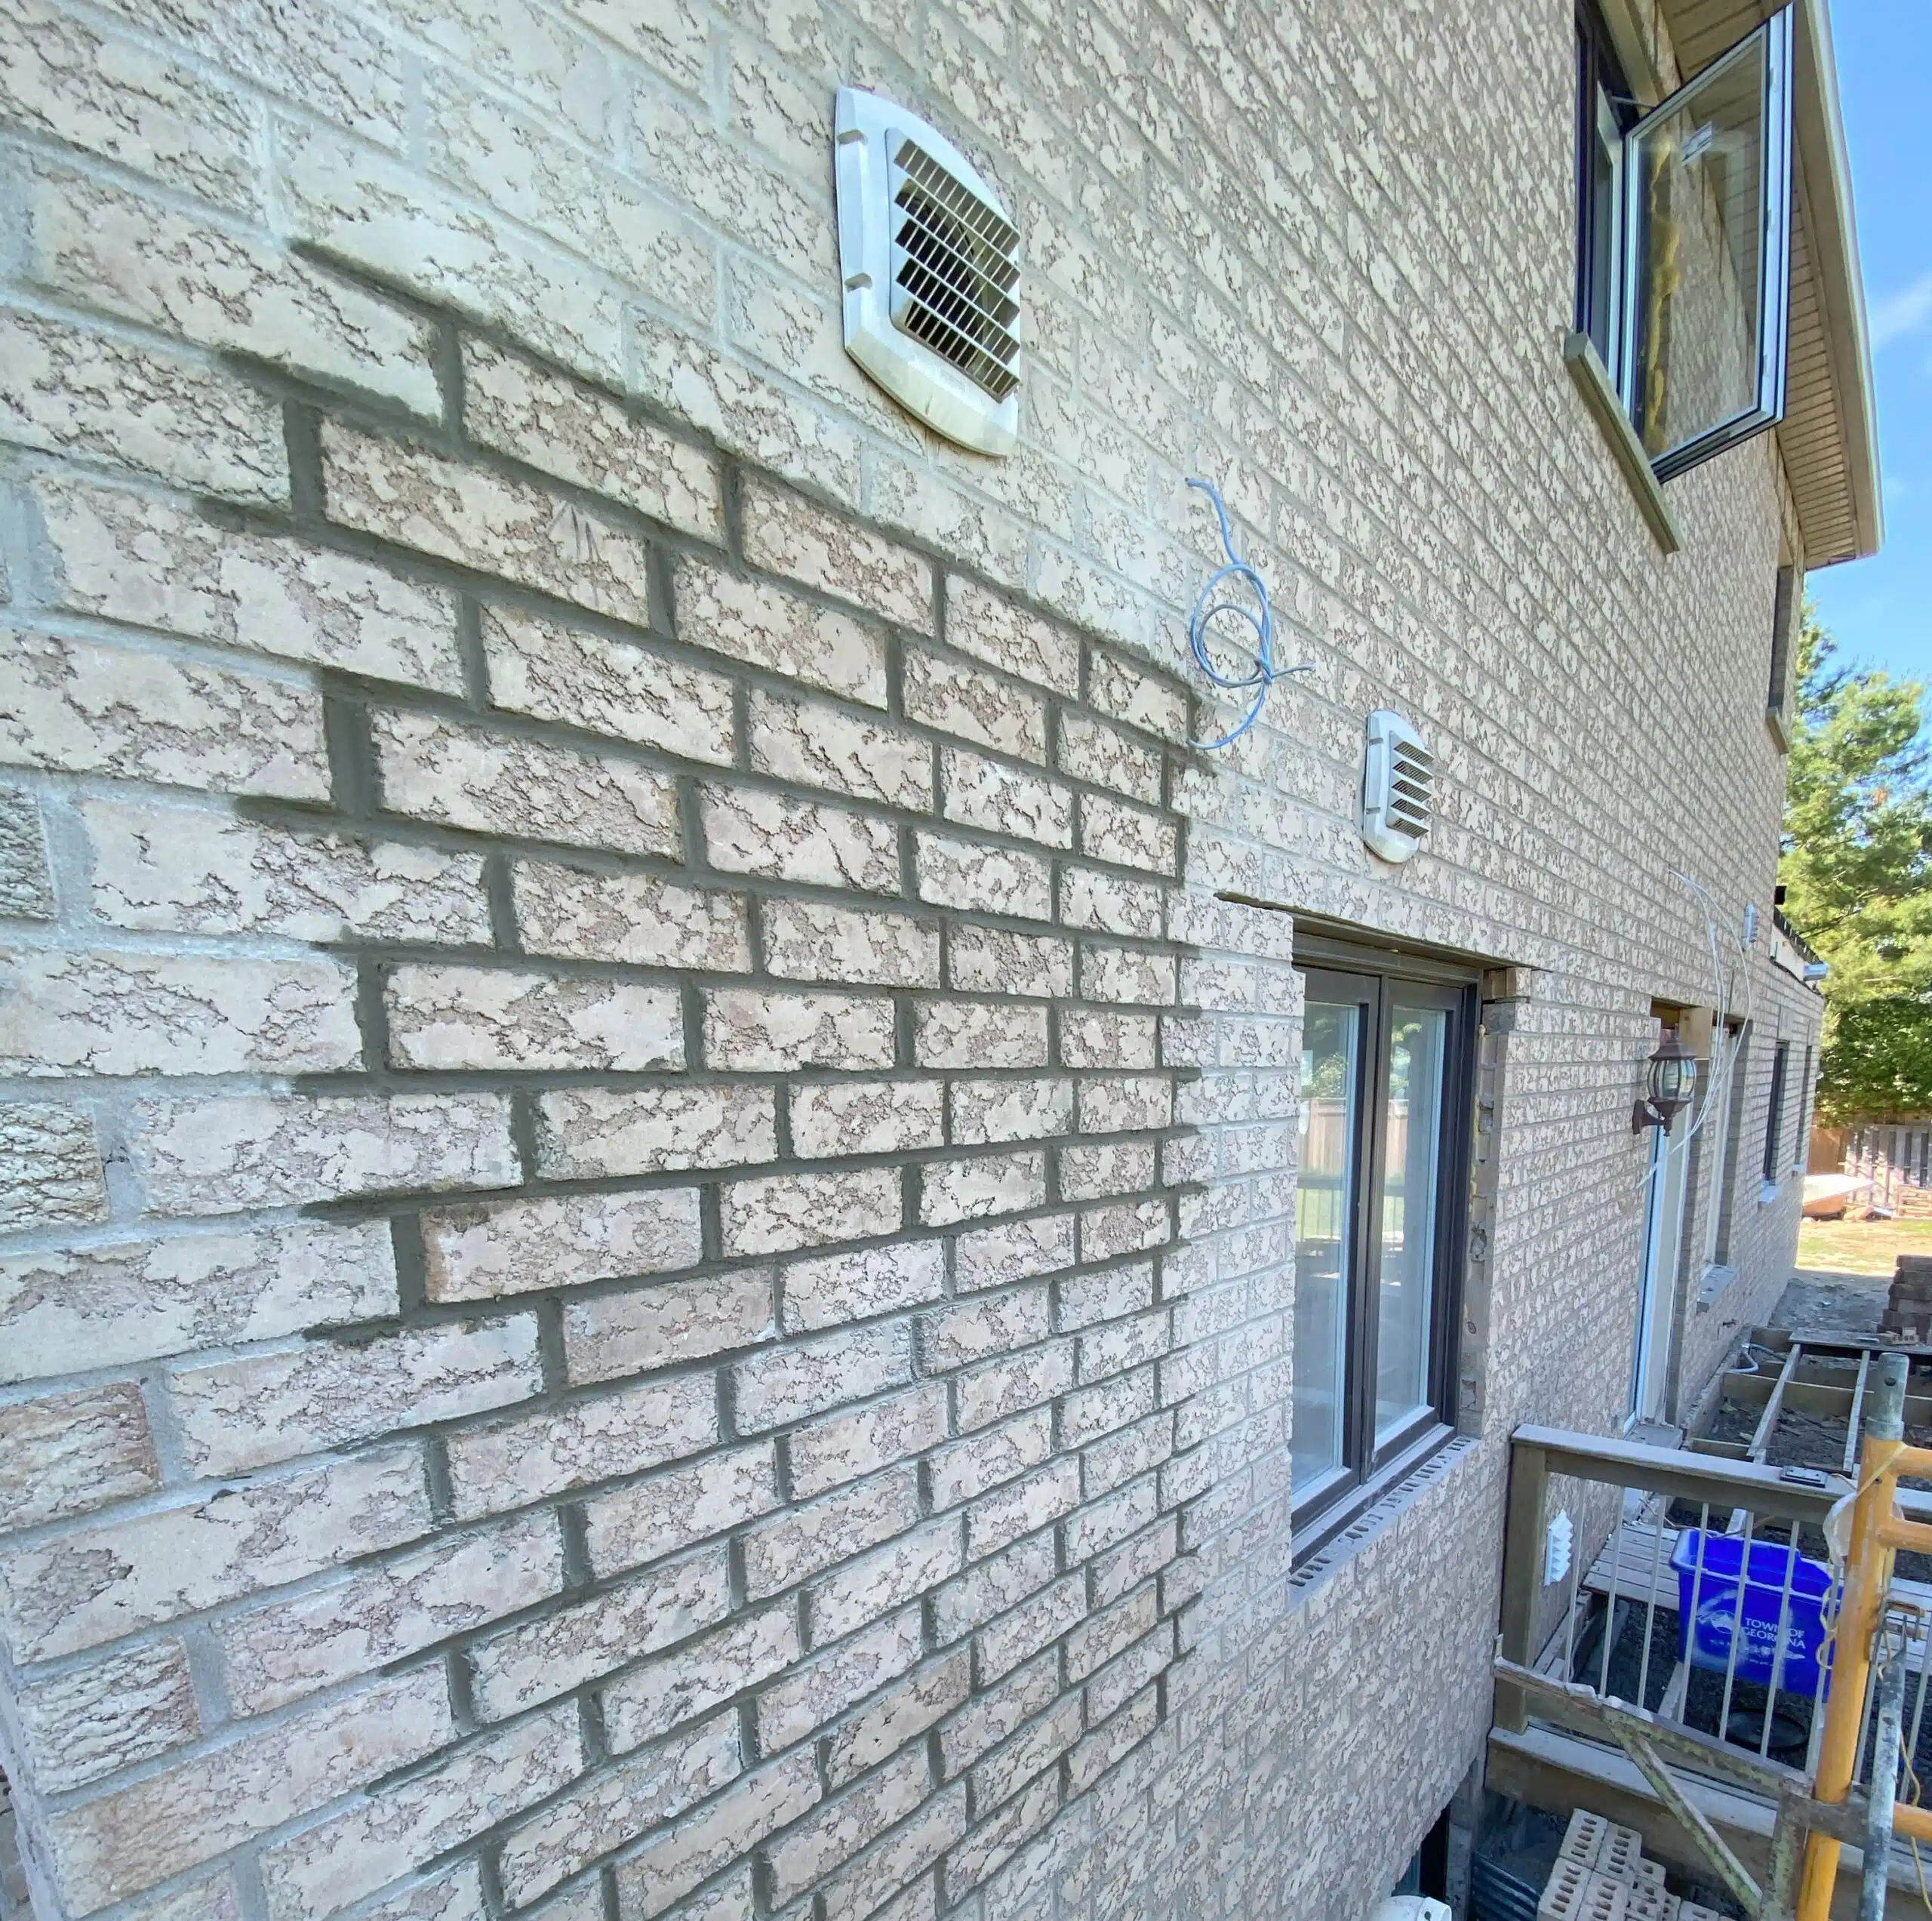 This image shows the exterior wall of a building constructed with light-colored brick The bricks have a textured weathered appearance creating an interesting visual pattern on the wall There is a small ventilation grill or vent installed in the wall and a window is visible on the right side of the image The overall scene suggests a residential or commercial building exterior